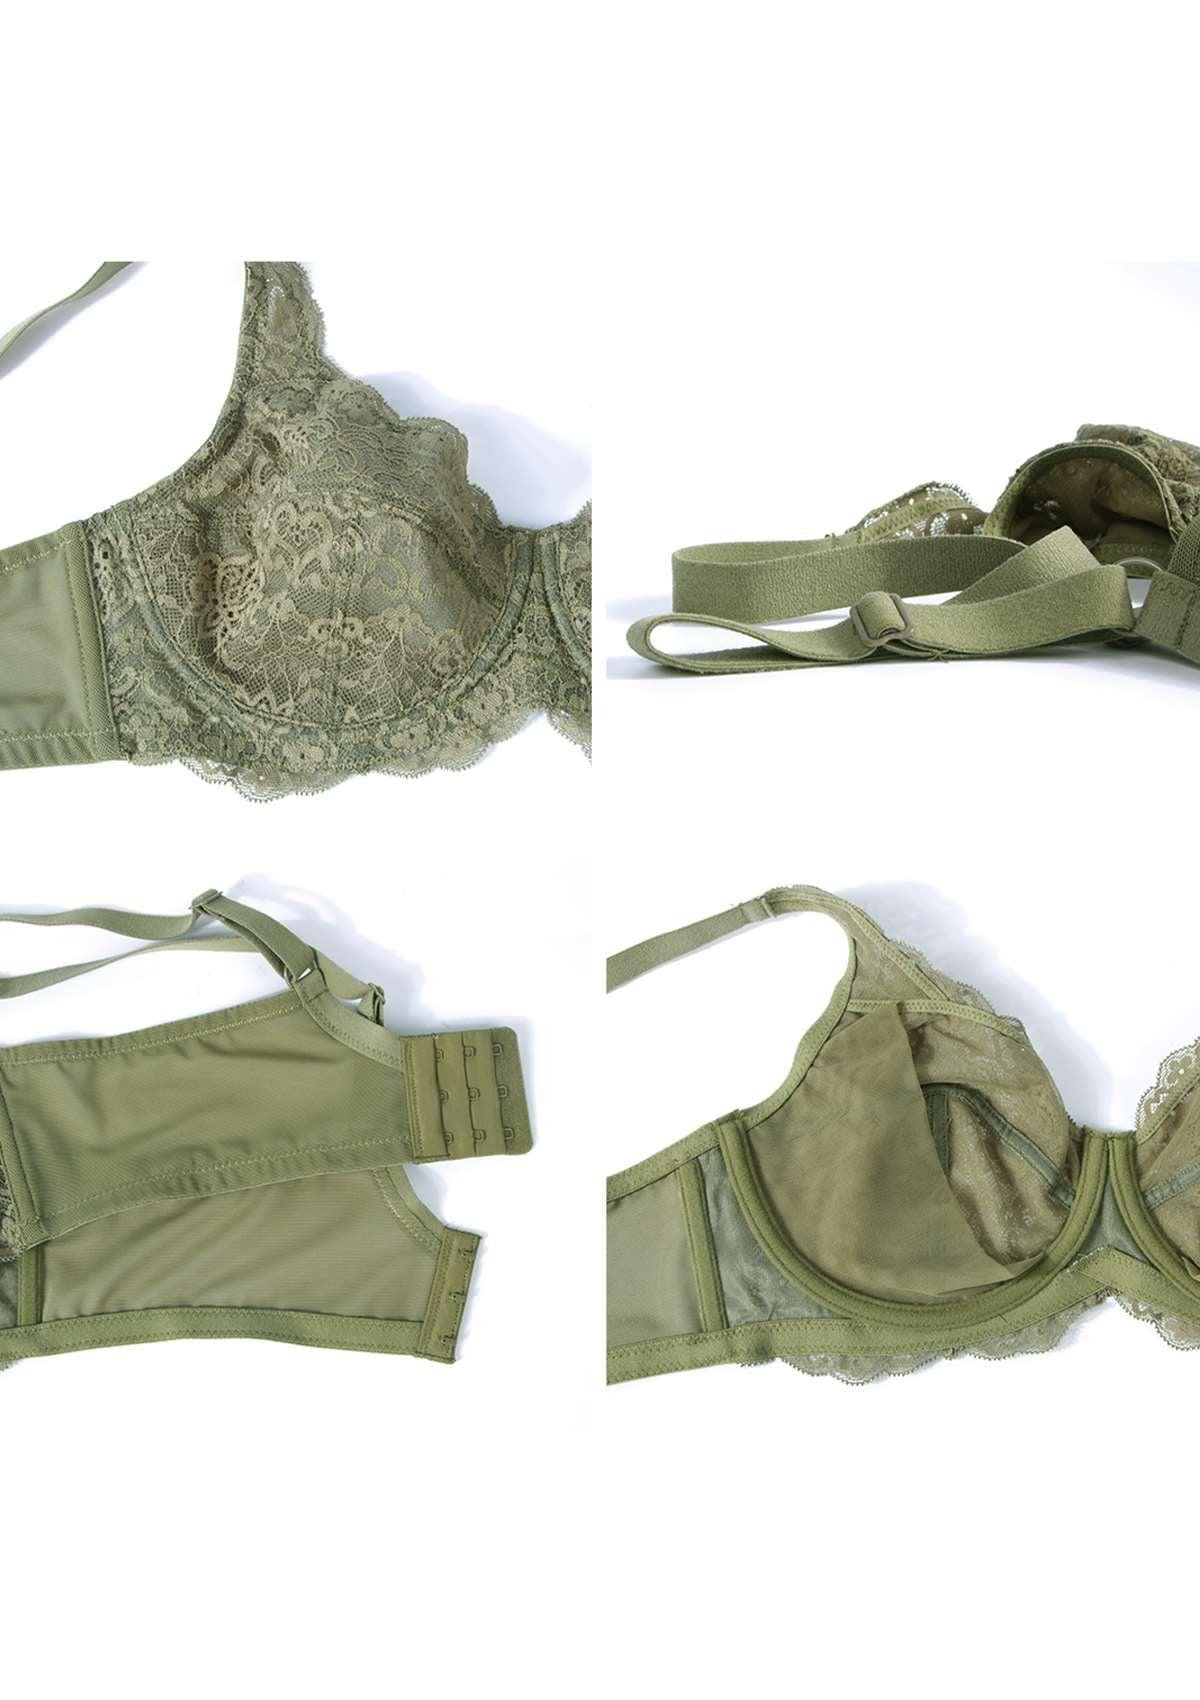 HSIA All-Over Floral Lace Unlined Bra: Minimizer Bra For Heavy Breasts - Dark Green / 38 / DDD/F